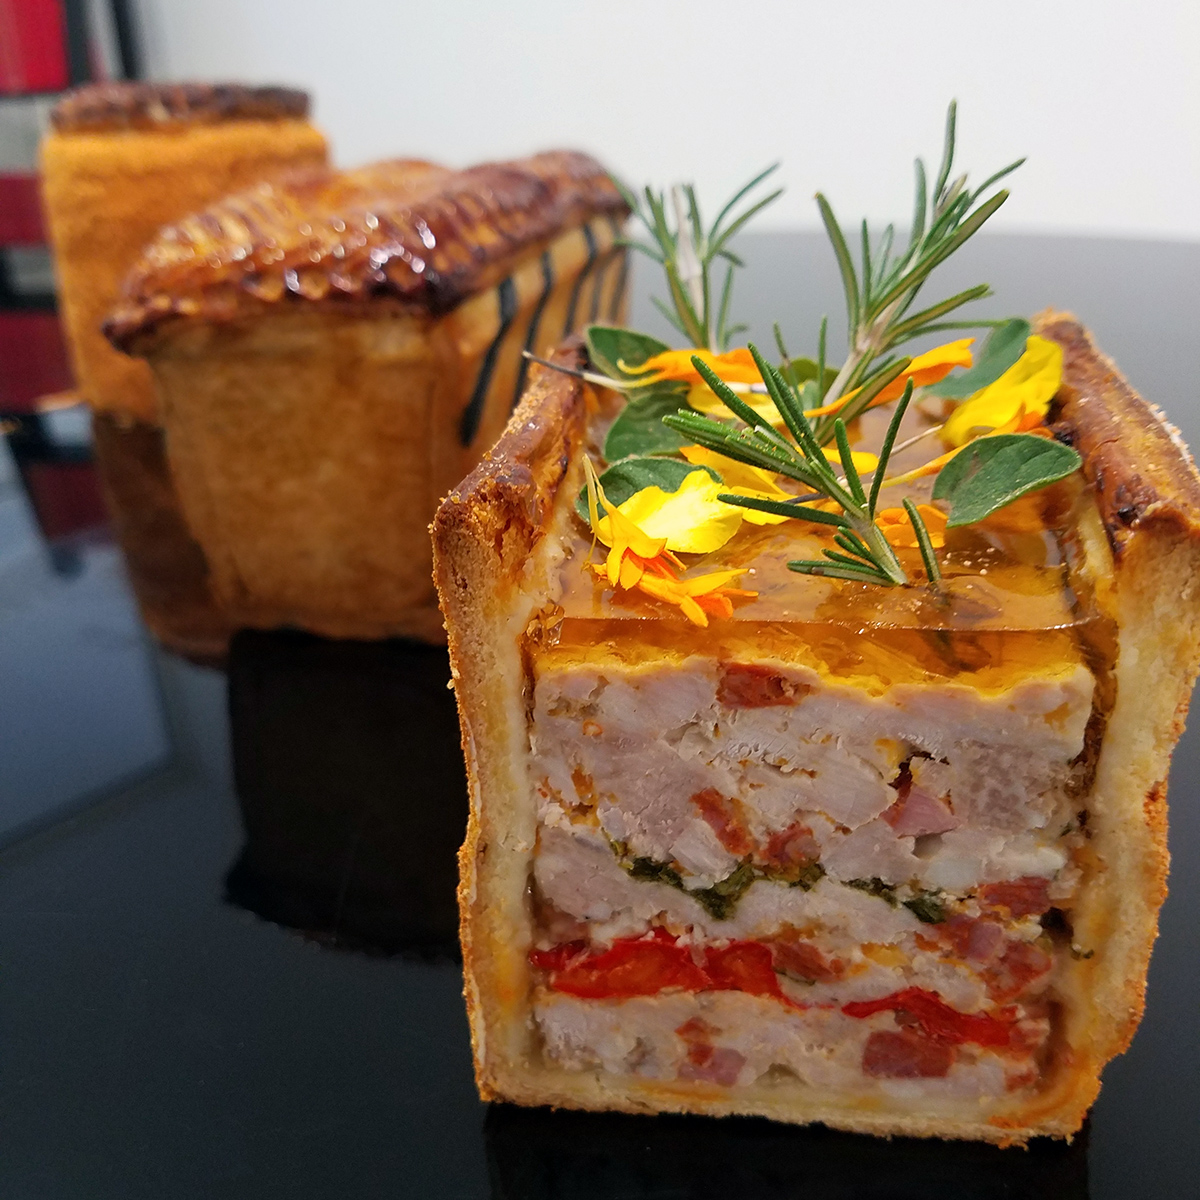 Espelette chili pâté en croûte by Gastronomicom 😋
.
#gastronomicom #frenchculinary #frenchcooking #frenchcuisine #frenchcookery #culinaryschool #learntocook #pateencroute